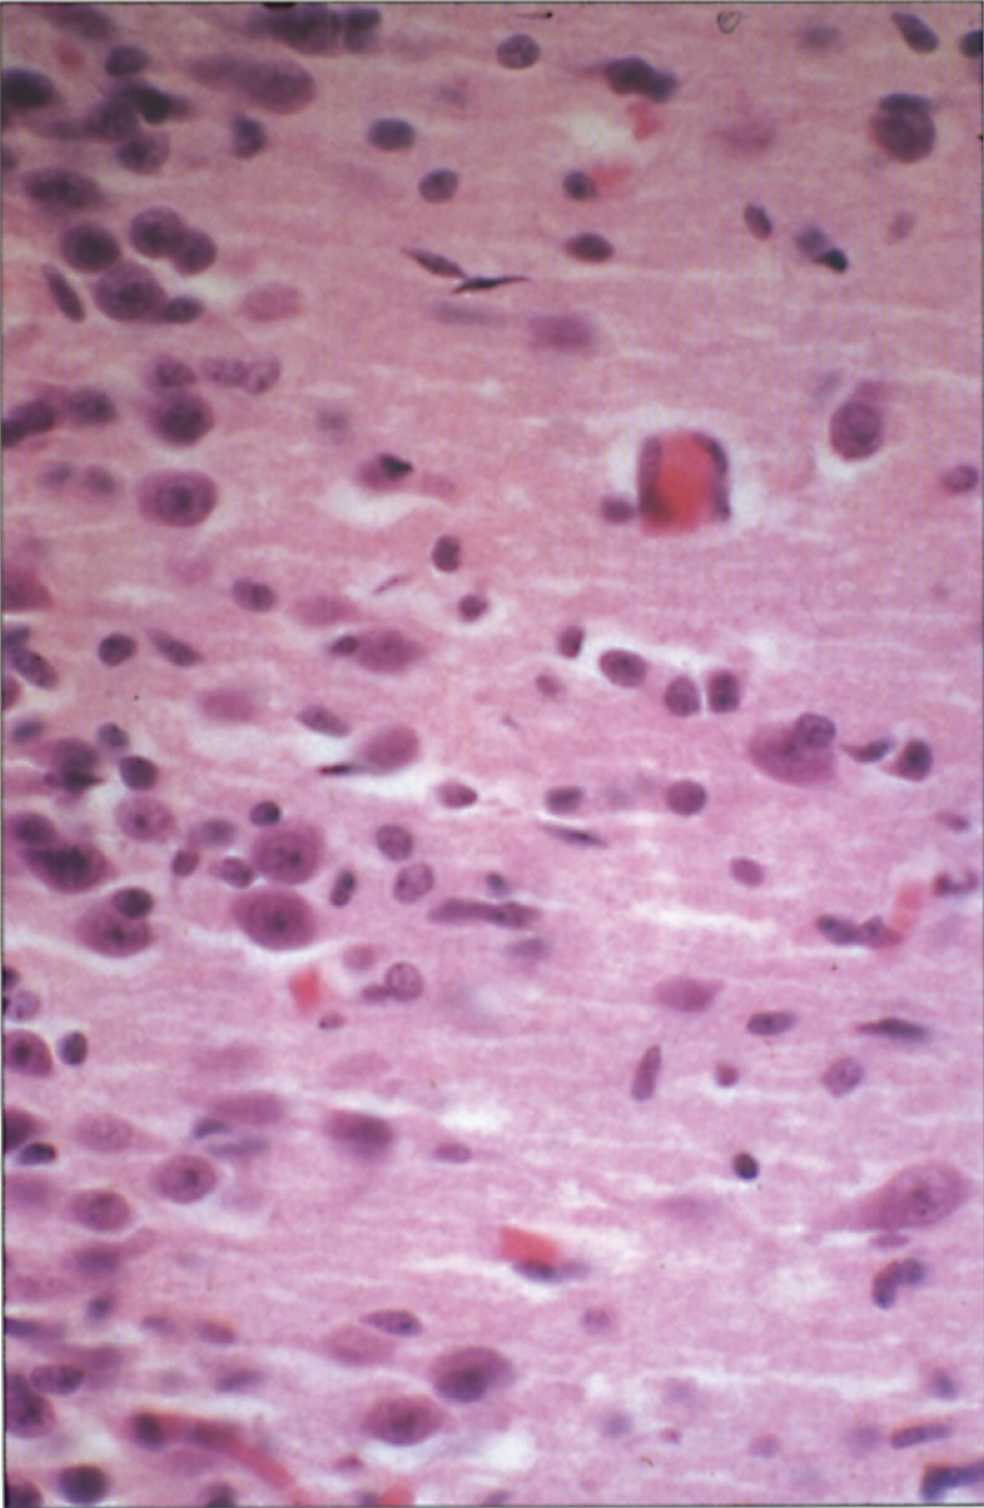 CPS deficiency. Microscopic section of cortex showing clusters of glial cells around neurons— “eggs in a basket” pattern.